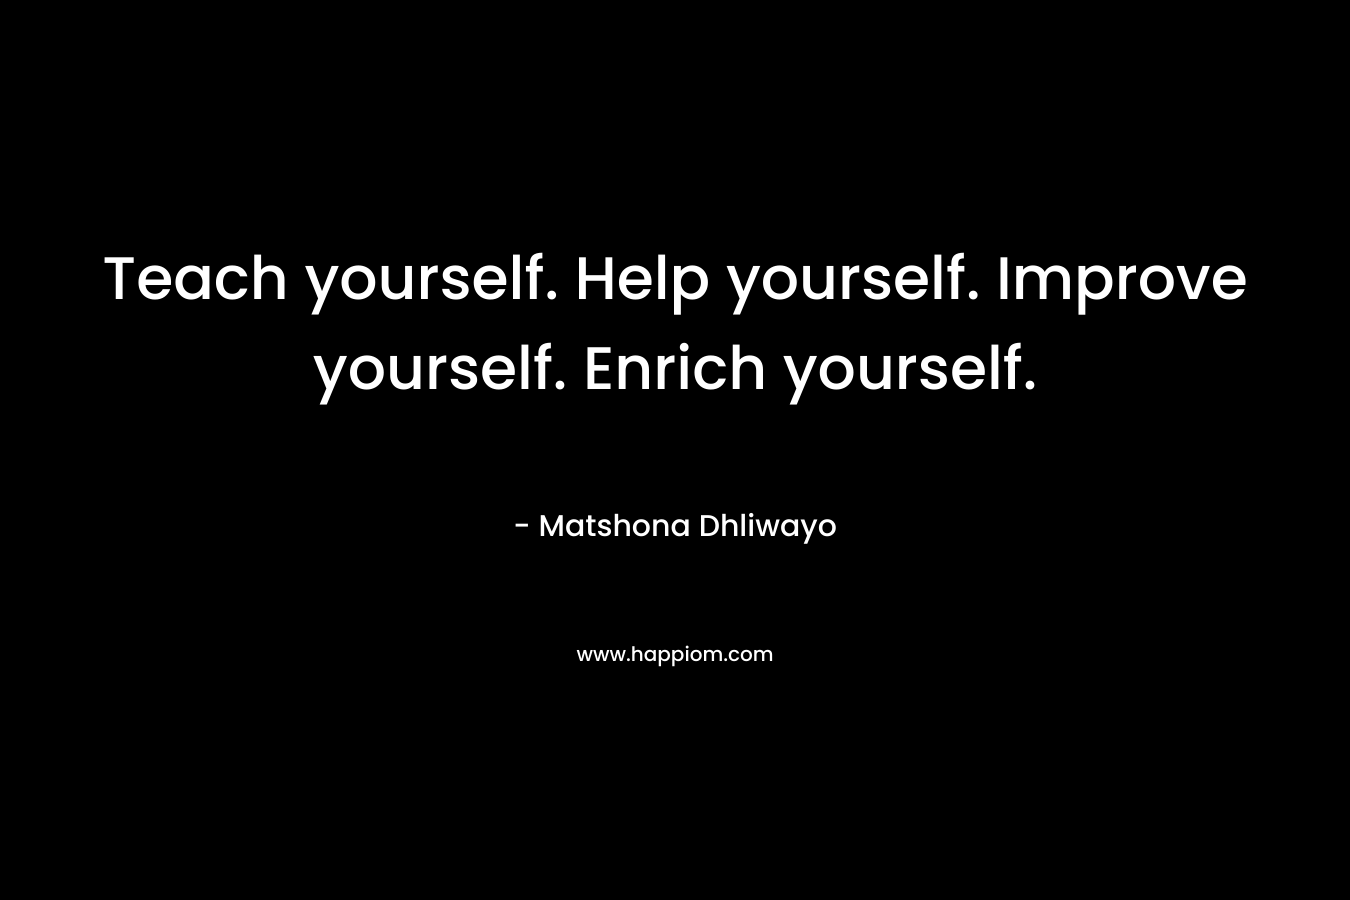 Teach yourself. Help yourself. Improve yourself. Enrich yourself.